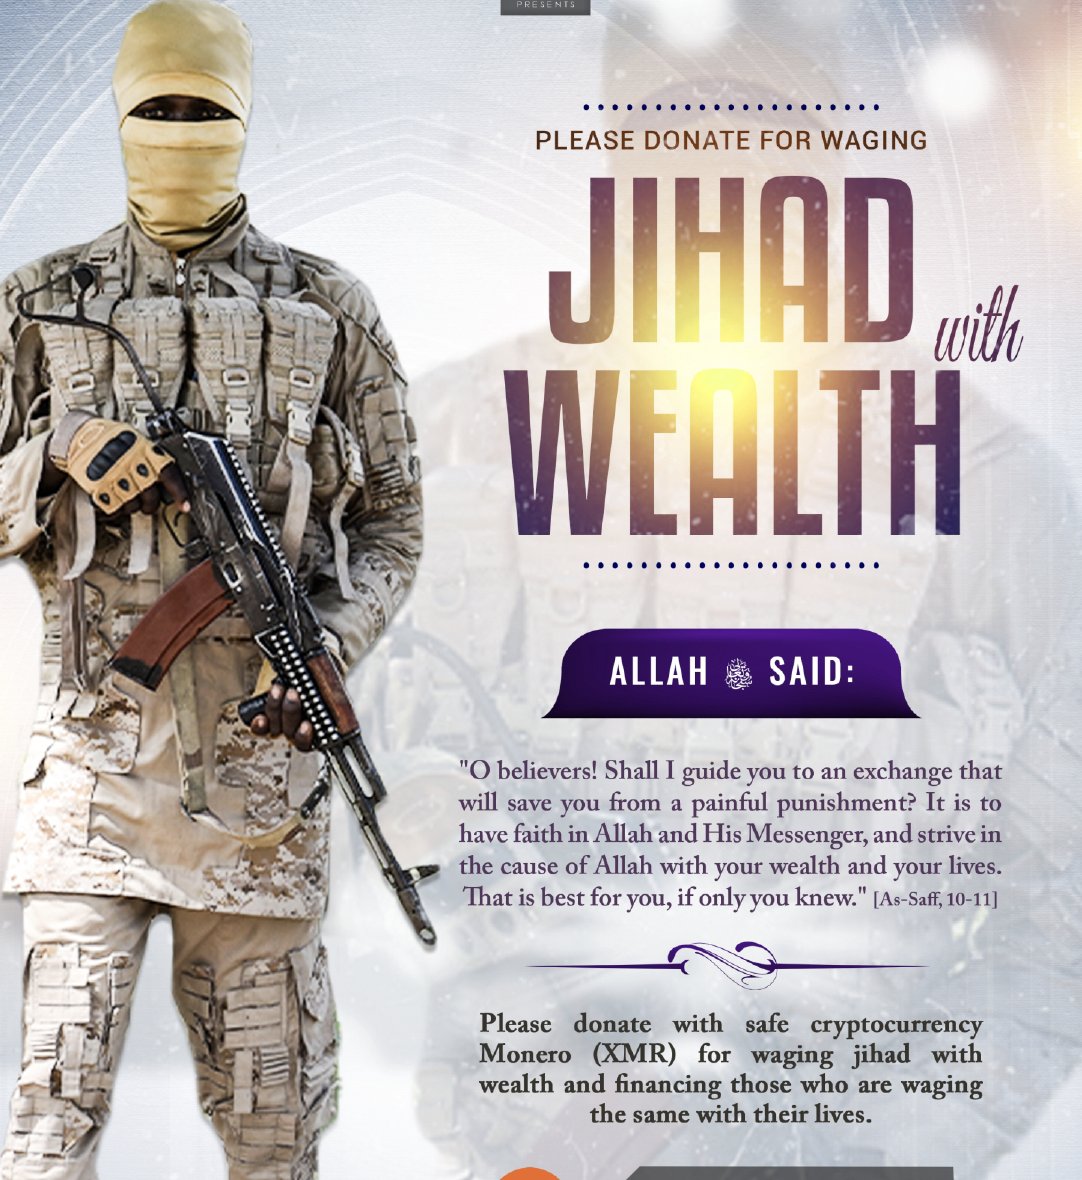 Much like other IS ecosystems, Islamic State Khorasan (ISKP) continues its call for raising money via cryptocurrency. Clearly its deemed as 'safe' by the group's ecosystem, older Hawala methods would never be advertised as such. (from latest VoK issue)